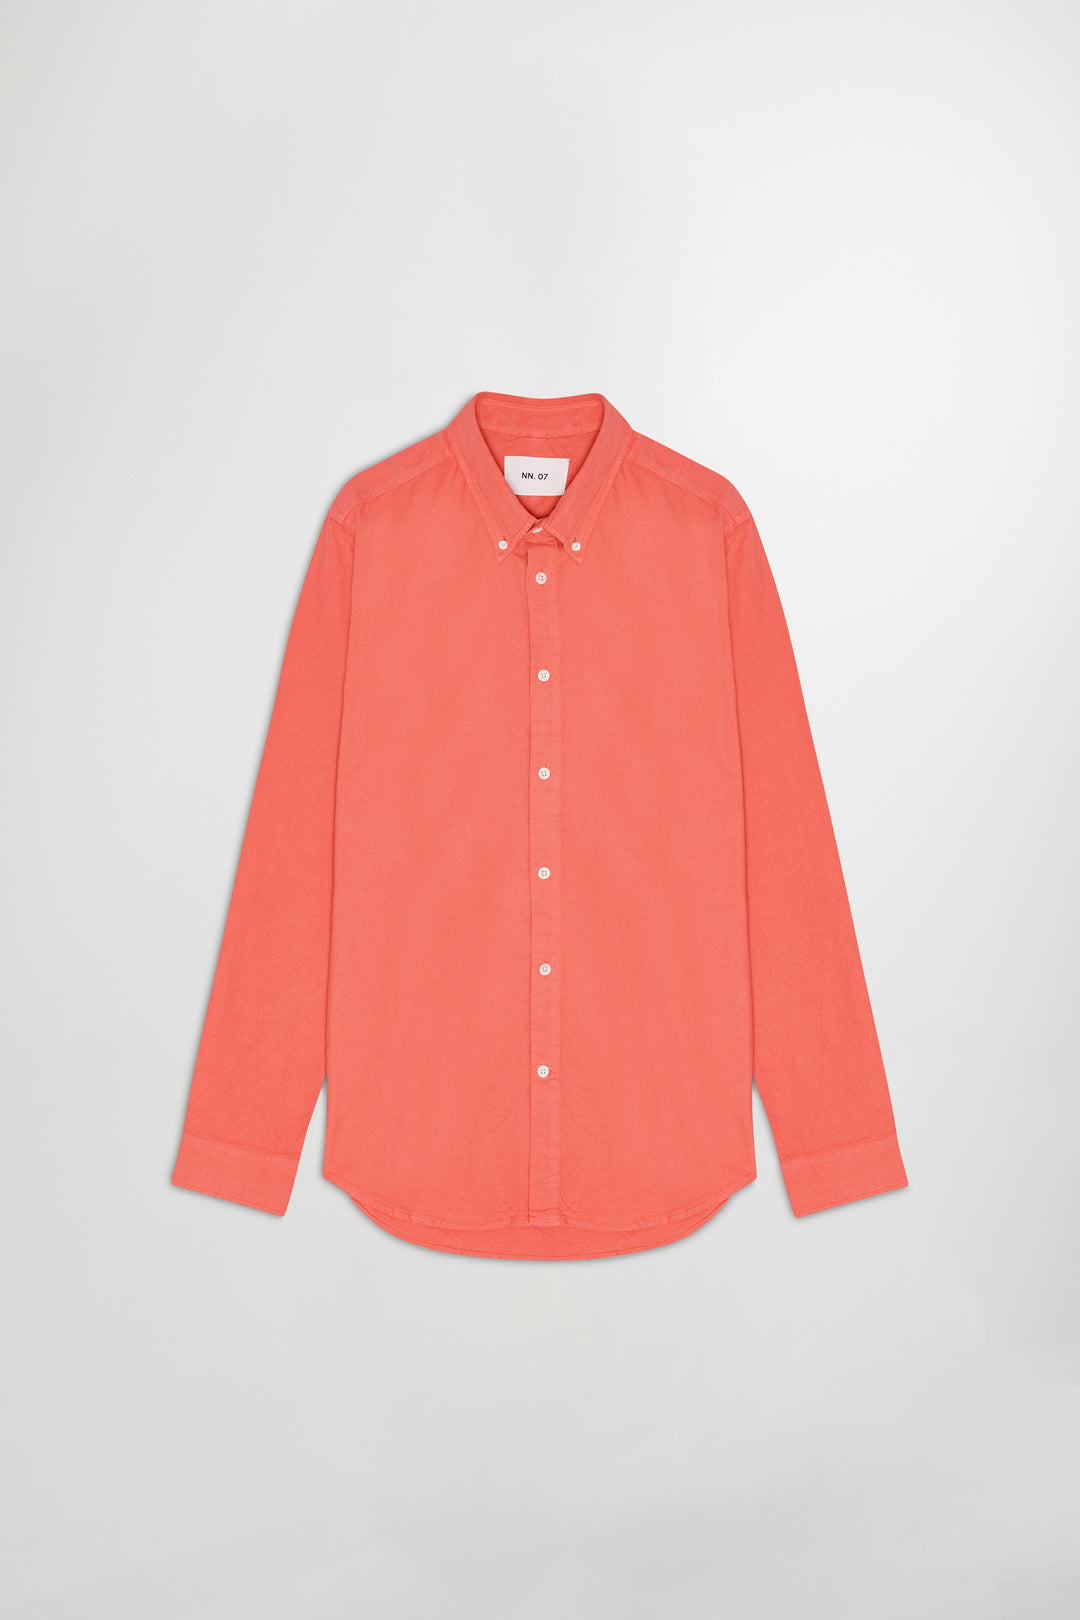 NN07 Arne No PKT 5725 Shirt in Spiced Coral | Buster McGee